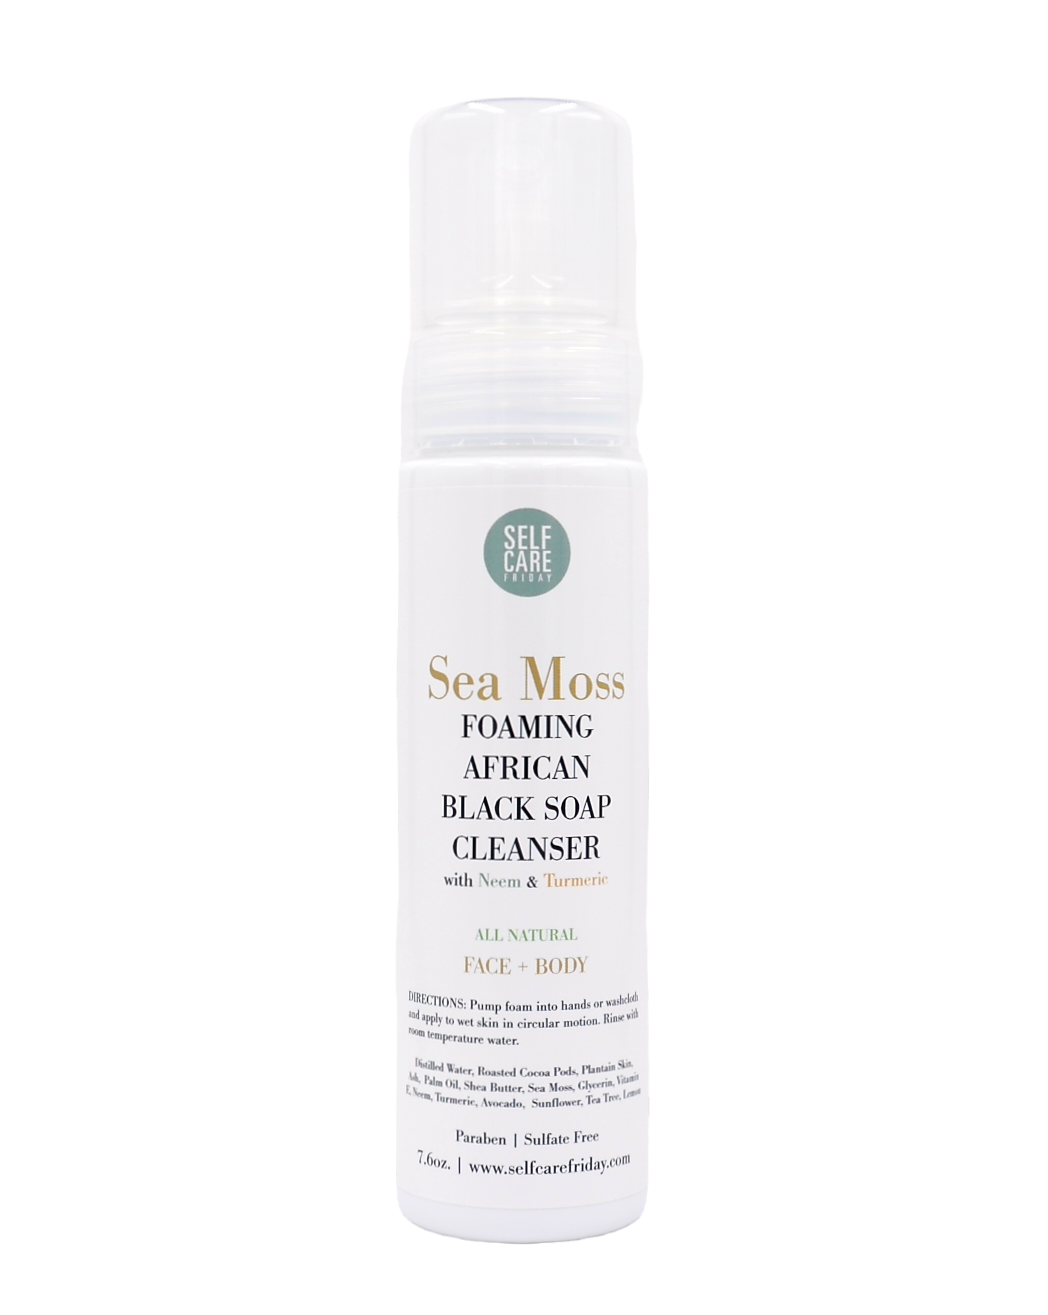 Sea Moss Foaming African Black Soap Cleanser with Neem & Turmeric